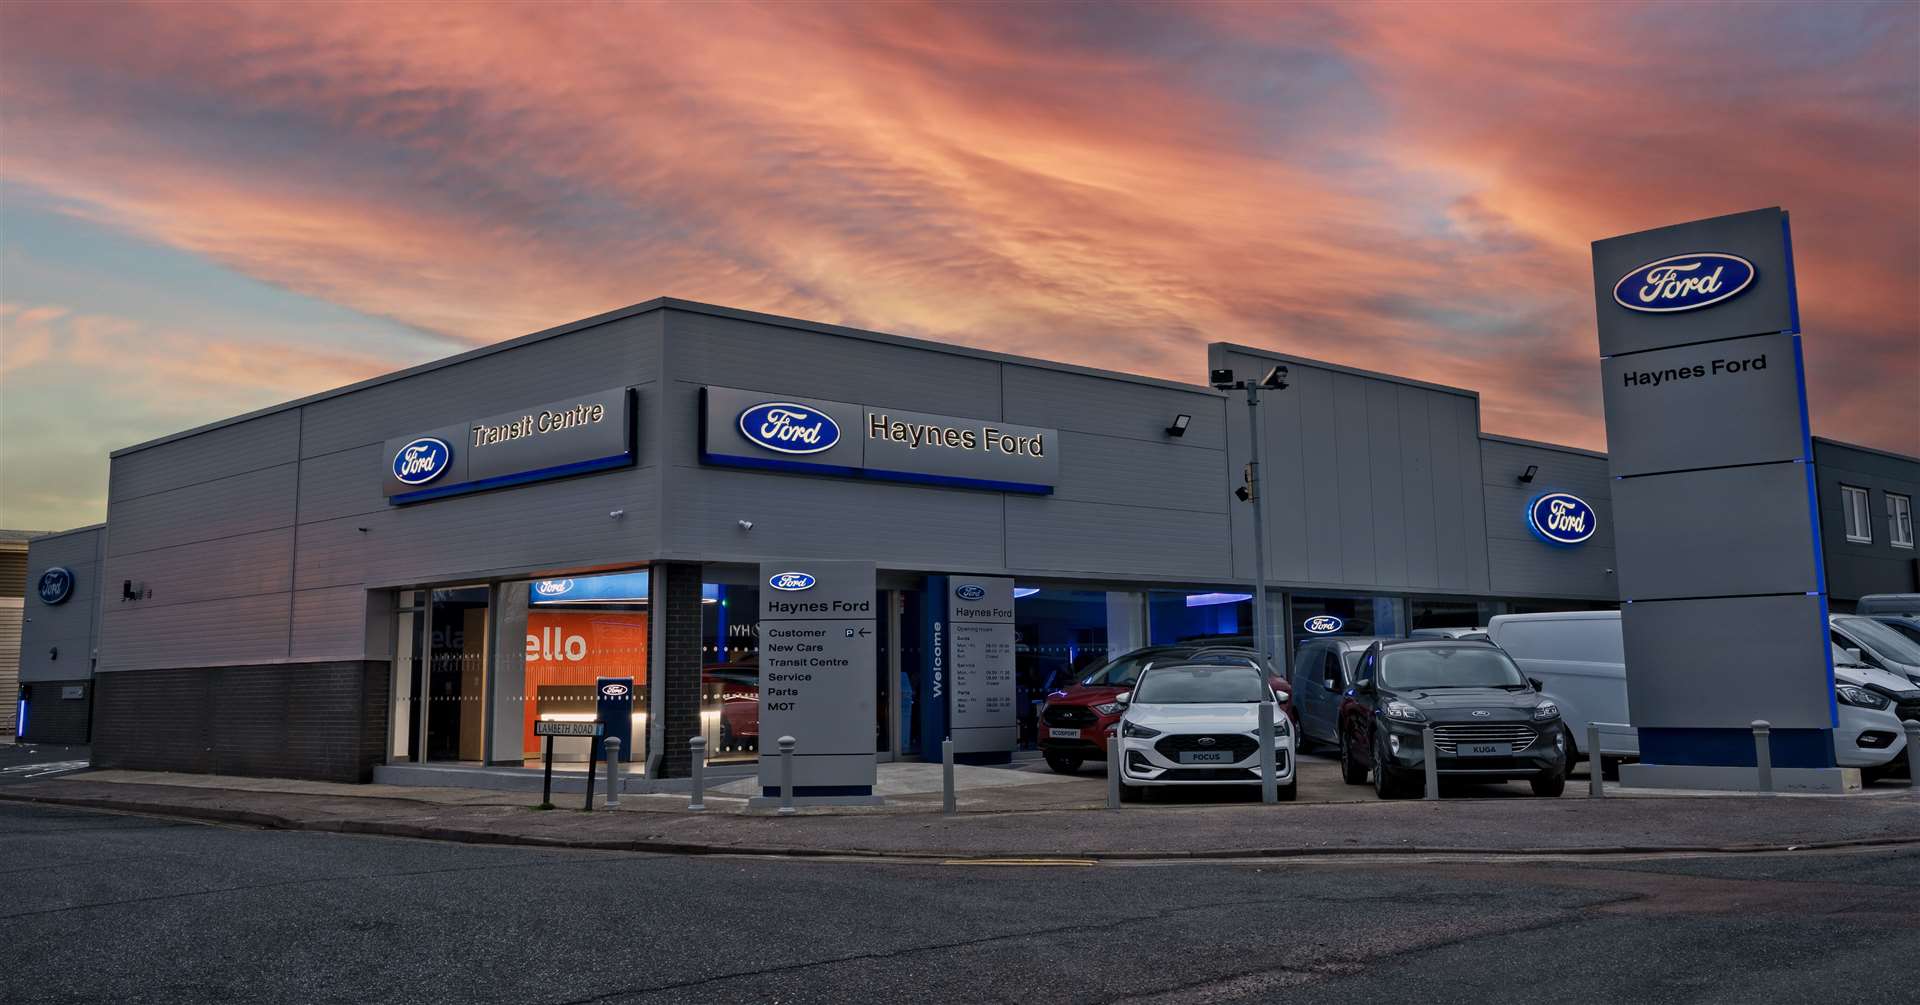 The new Haynes Ford Dealership on Westminster Road in Canterbury will feature Ford’s full range of both new cars and commercial vehicles.